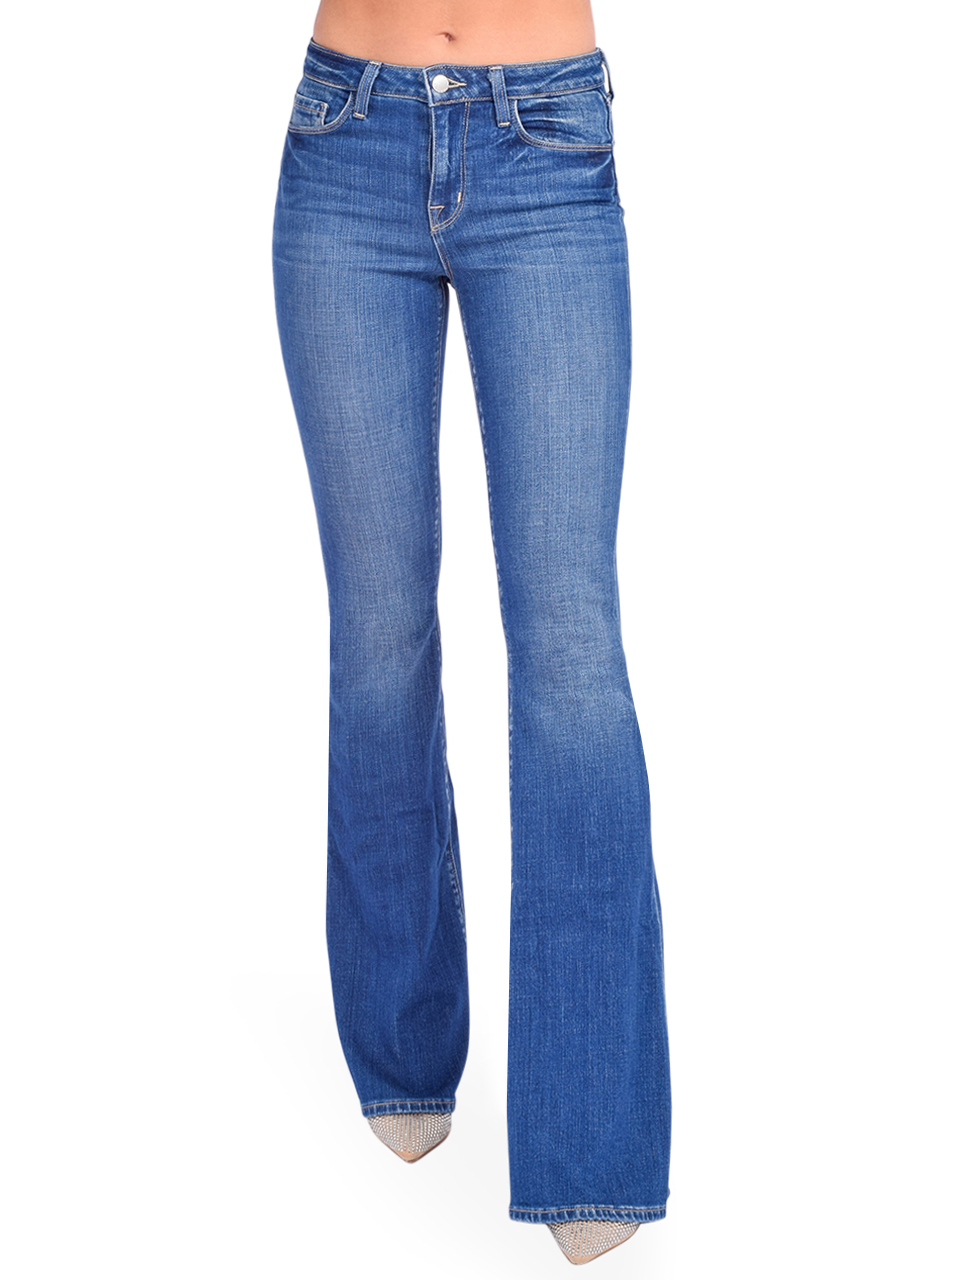 L'AGENCE Bell High Rise Flare Jeans in Hasting Front View 